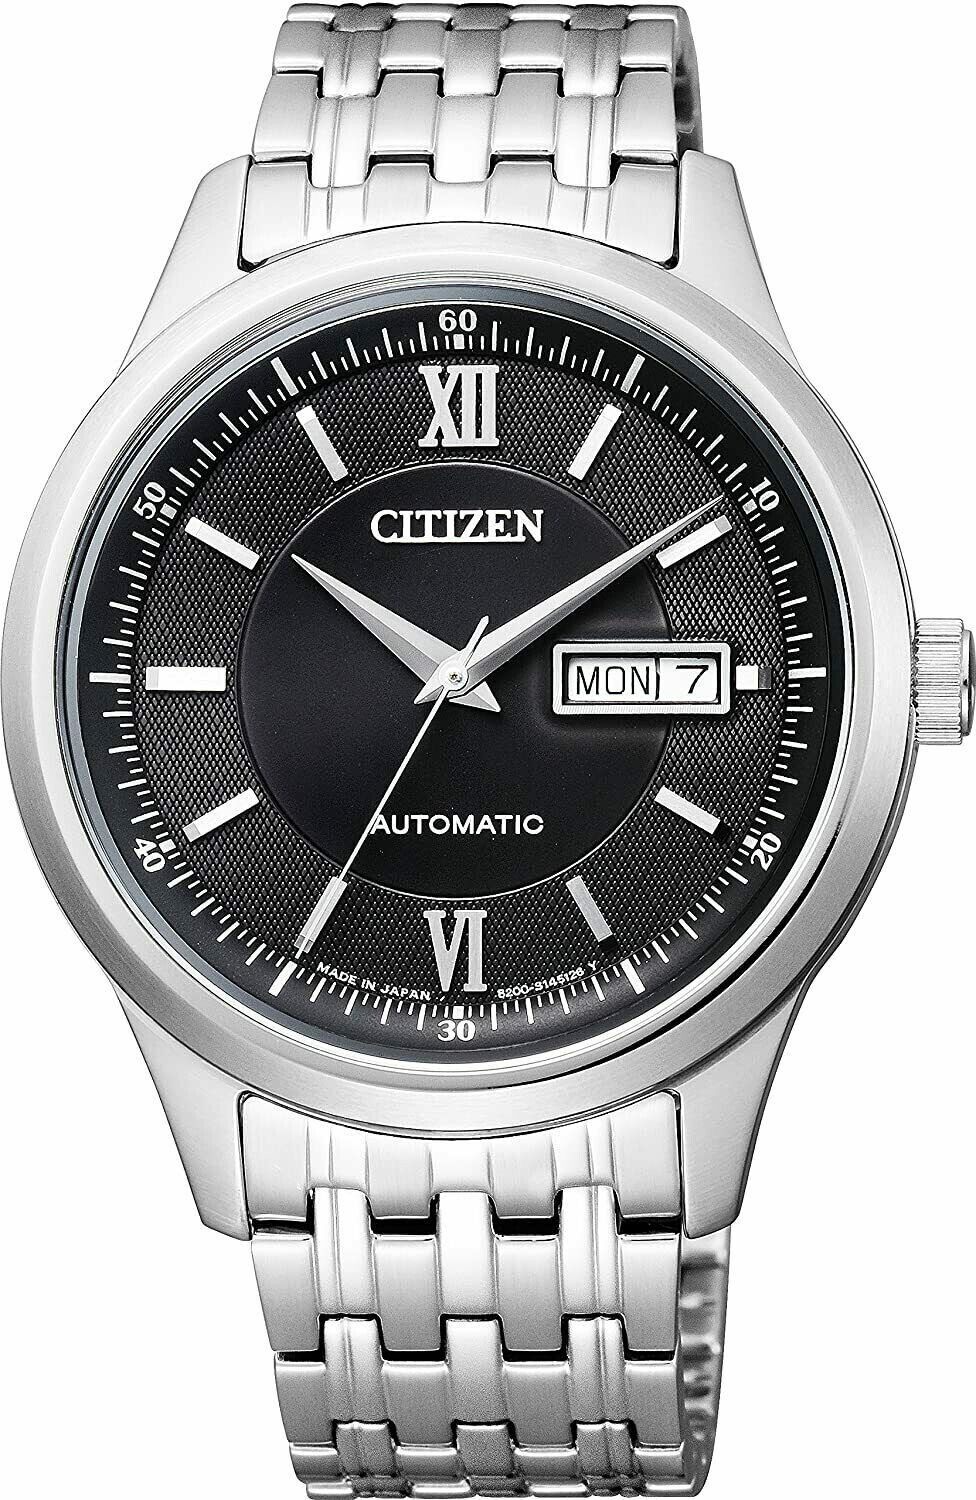 Citizen Classic NY4050-54E JDM Japan Made 40mm automatic men's watch Sapphire crystal 100m WR stainless steel bracelet (Japan Domestic Market) Made in Japan